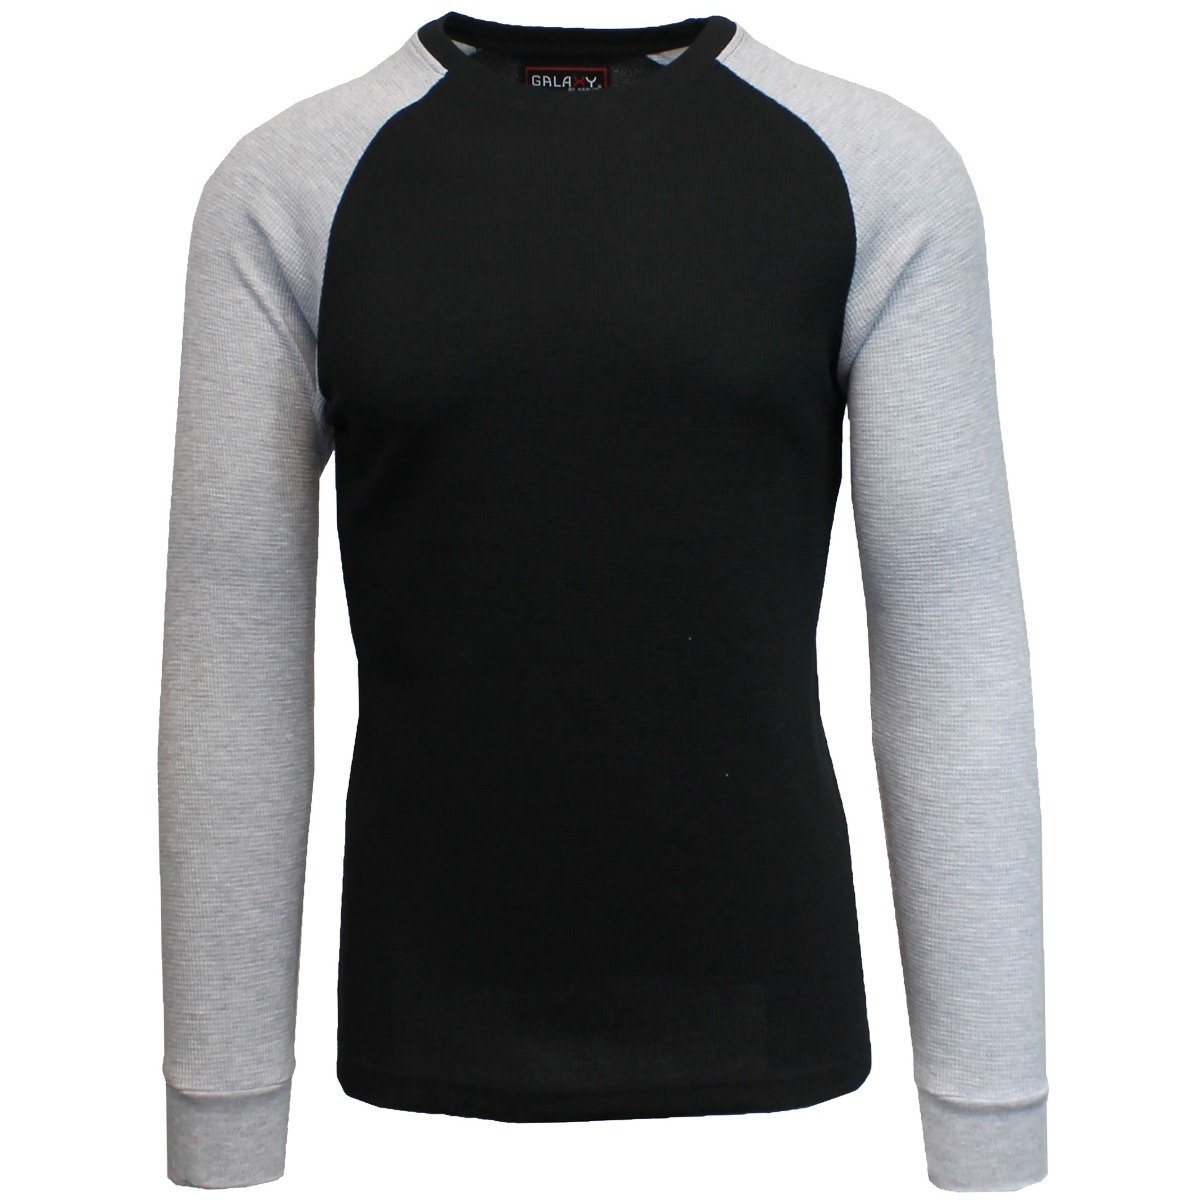 Galaxy by Harvic Men&#39;s Raglan Thermal Shirt - Assorted Sizes / Black/Heather Gray / Small